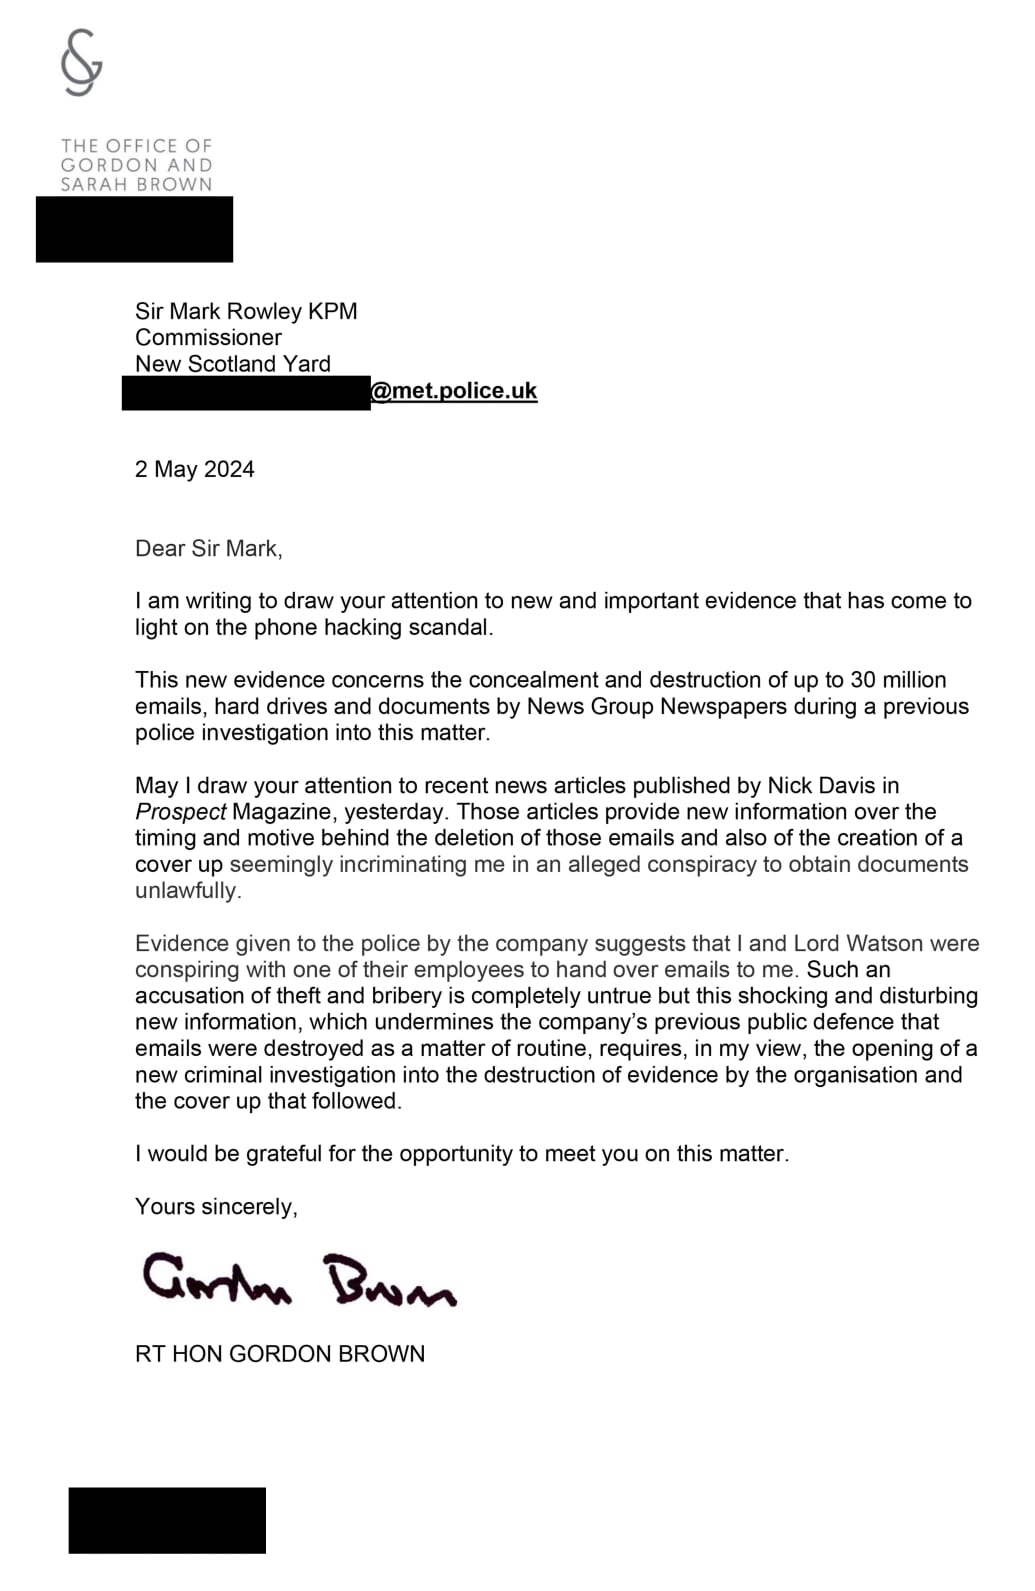 The letter former British prime minister Gordon Brown sent to the most senior police officer at Scotland Yard demanding a criminal investigation into allegations of cover-up by News Corporation.